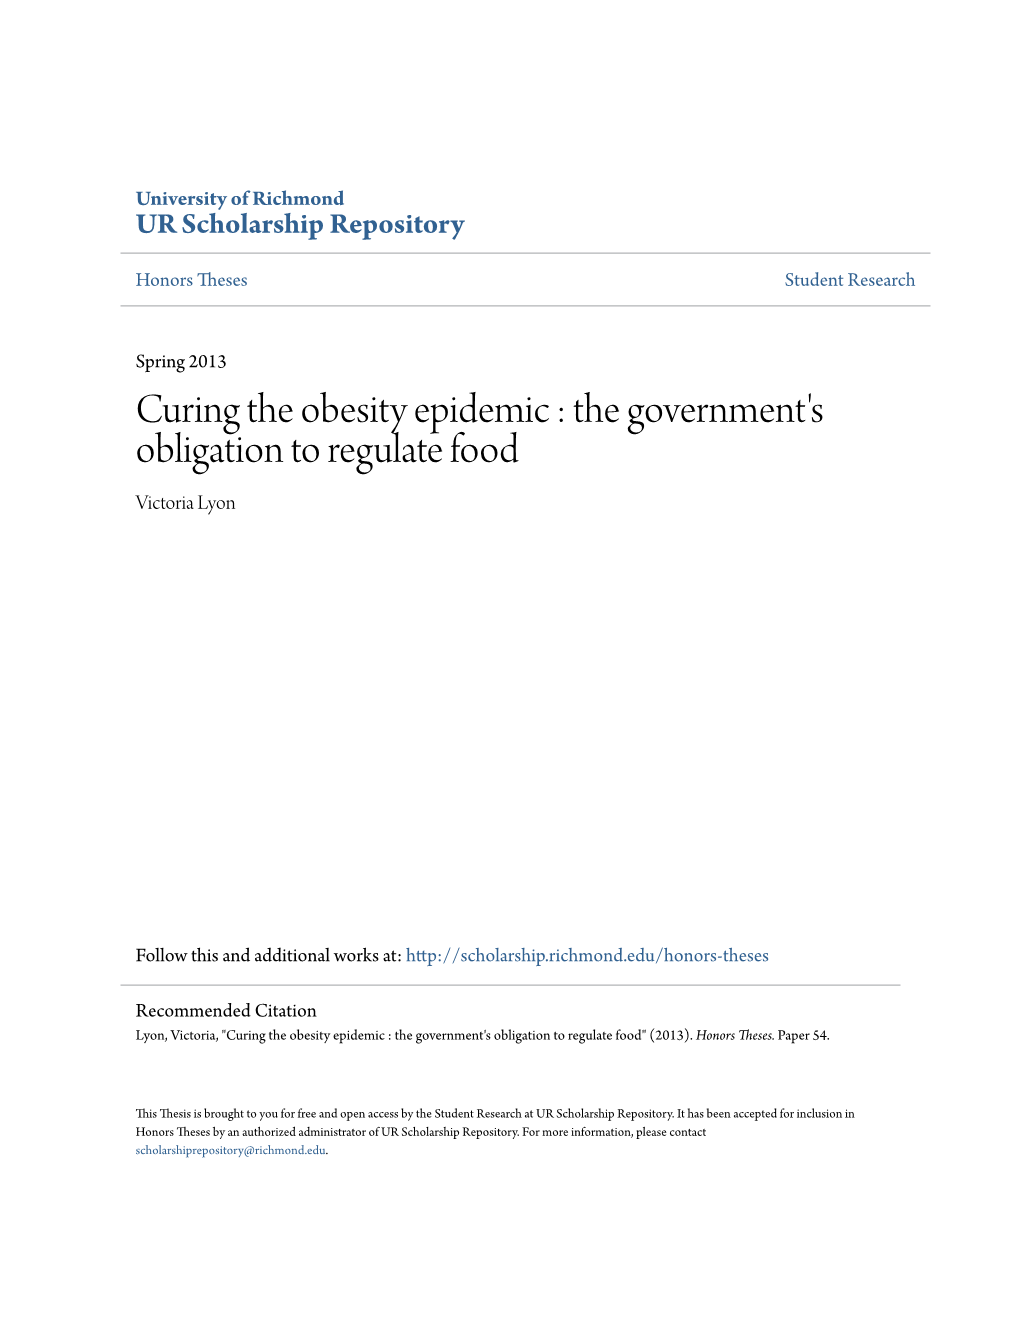 Curing the Obesity Epidemic : the Government's Obligation to Regulate Food Victoria Lyon